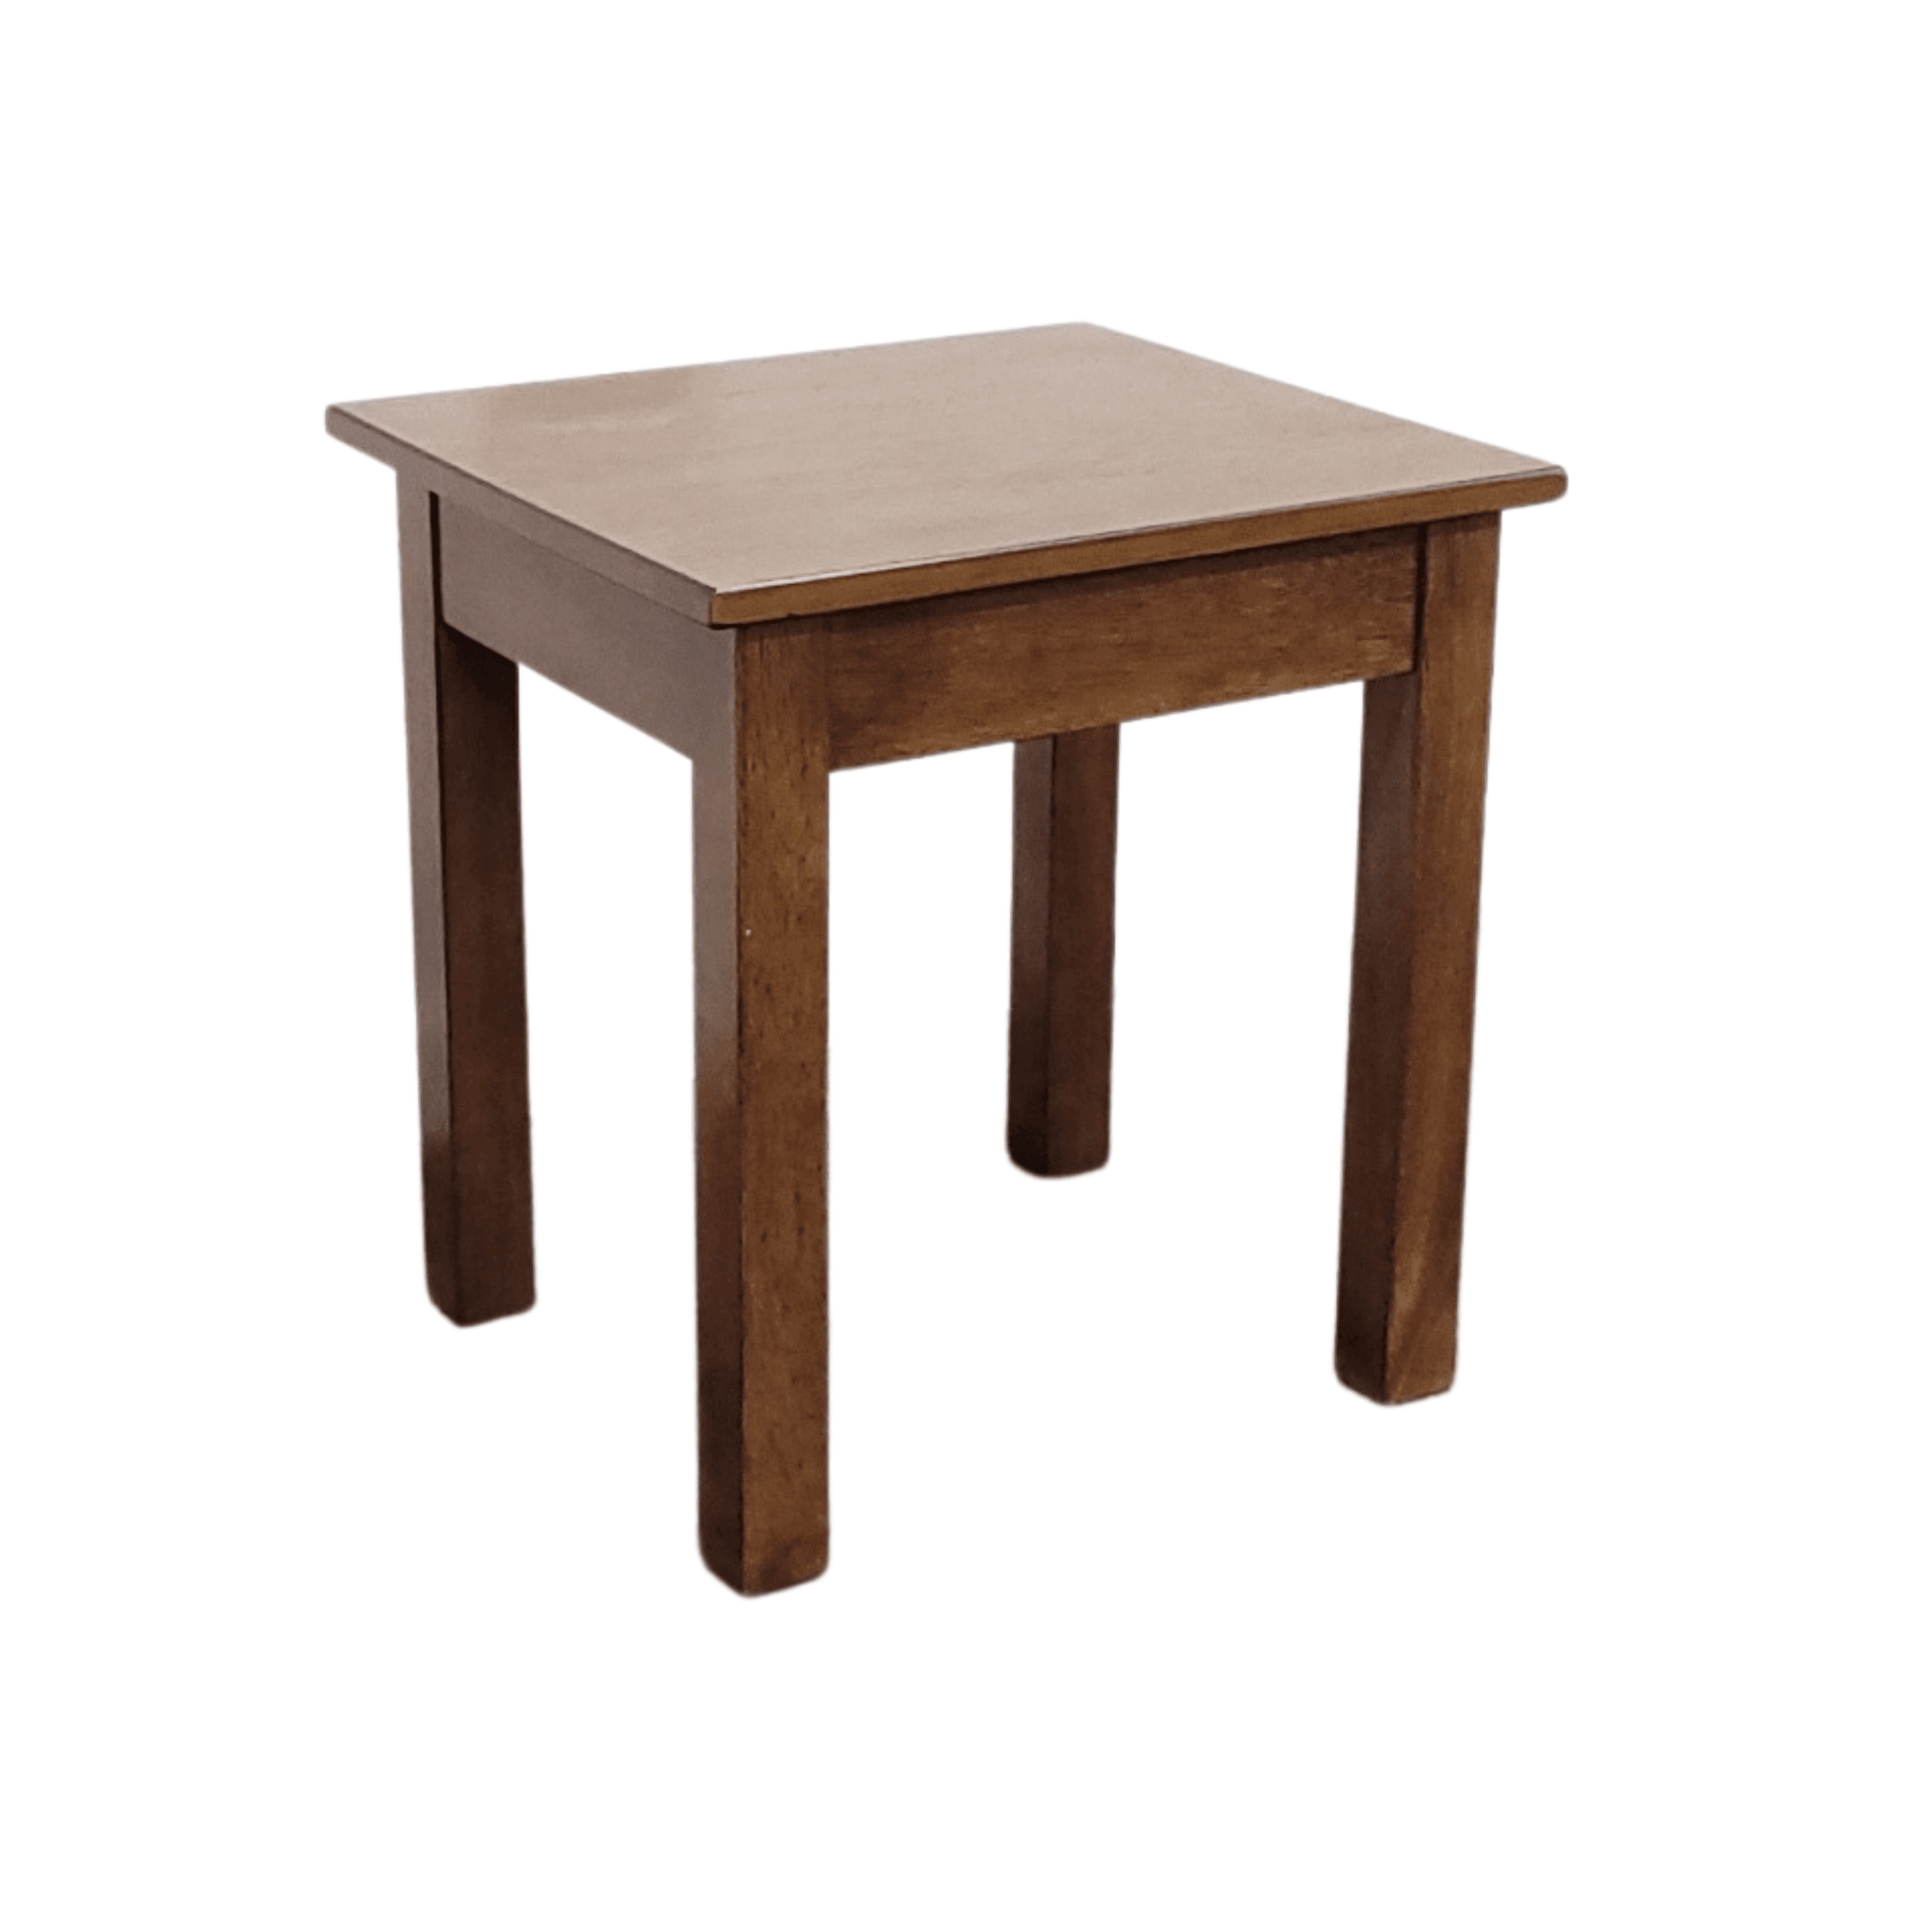 Discover Lucy End Table - A Stylish and Versatile Wooden Stool - The A2Z Furniture